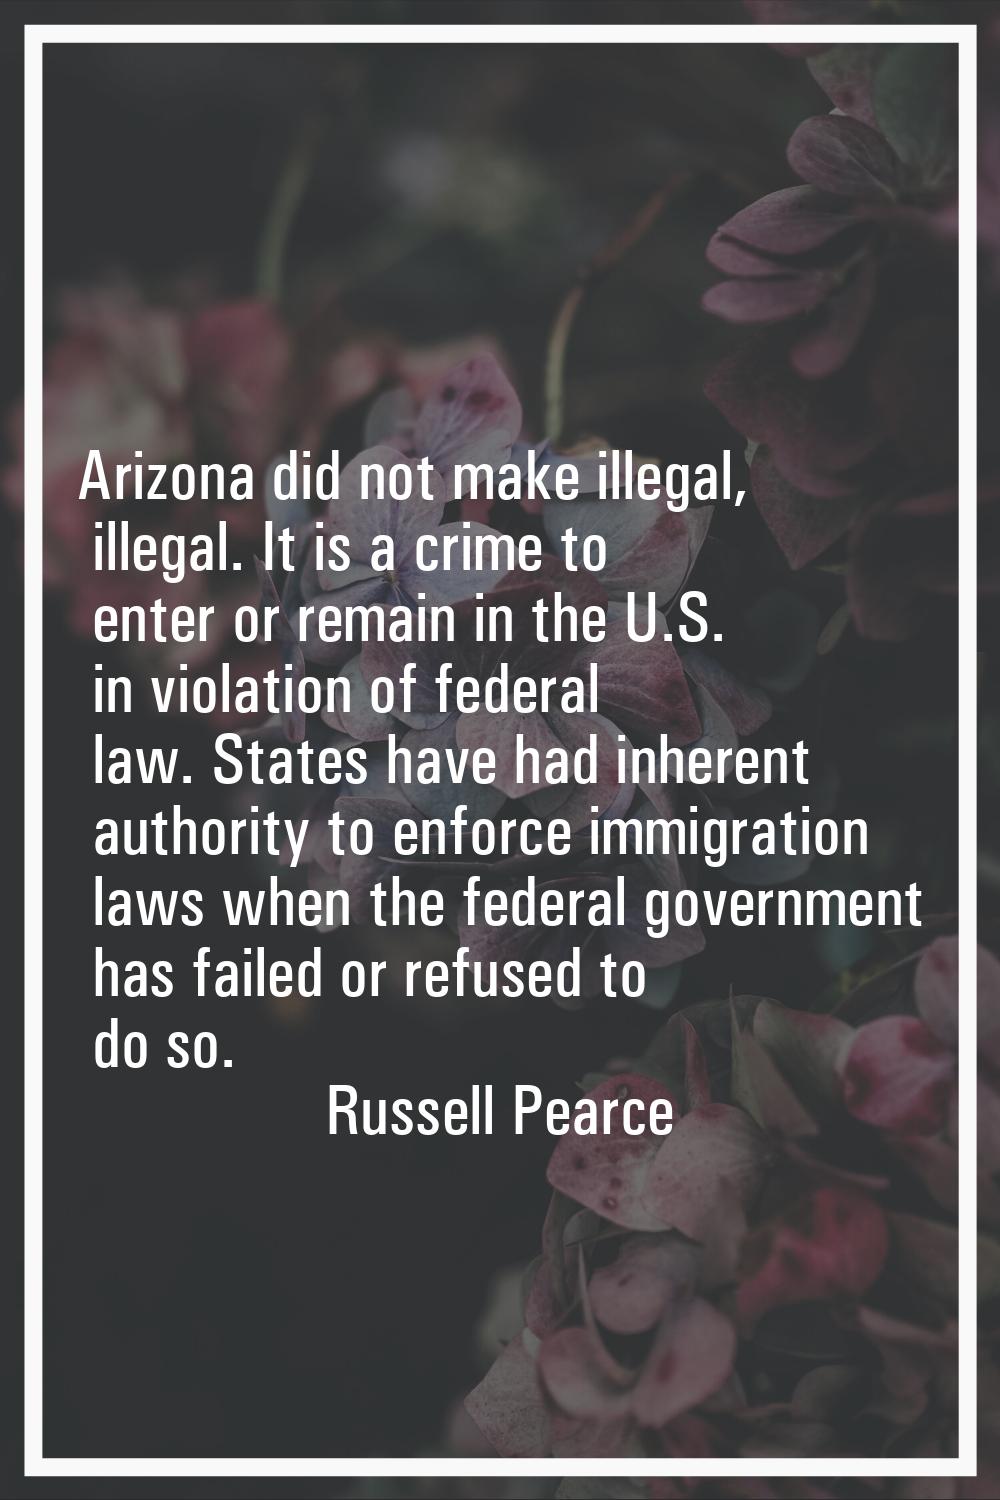 Arizona did not make illegal, illegal. It is a crime to enter or remain in the U.S. in violation of